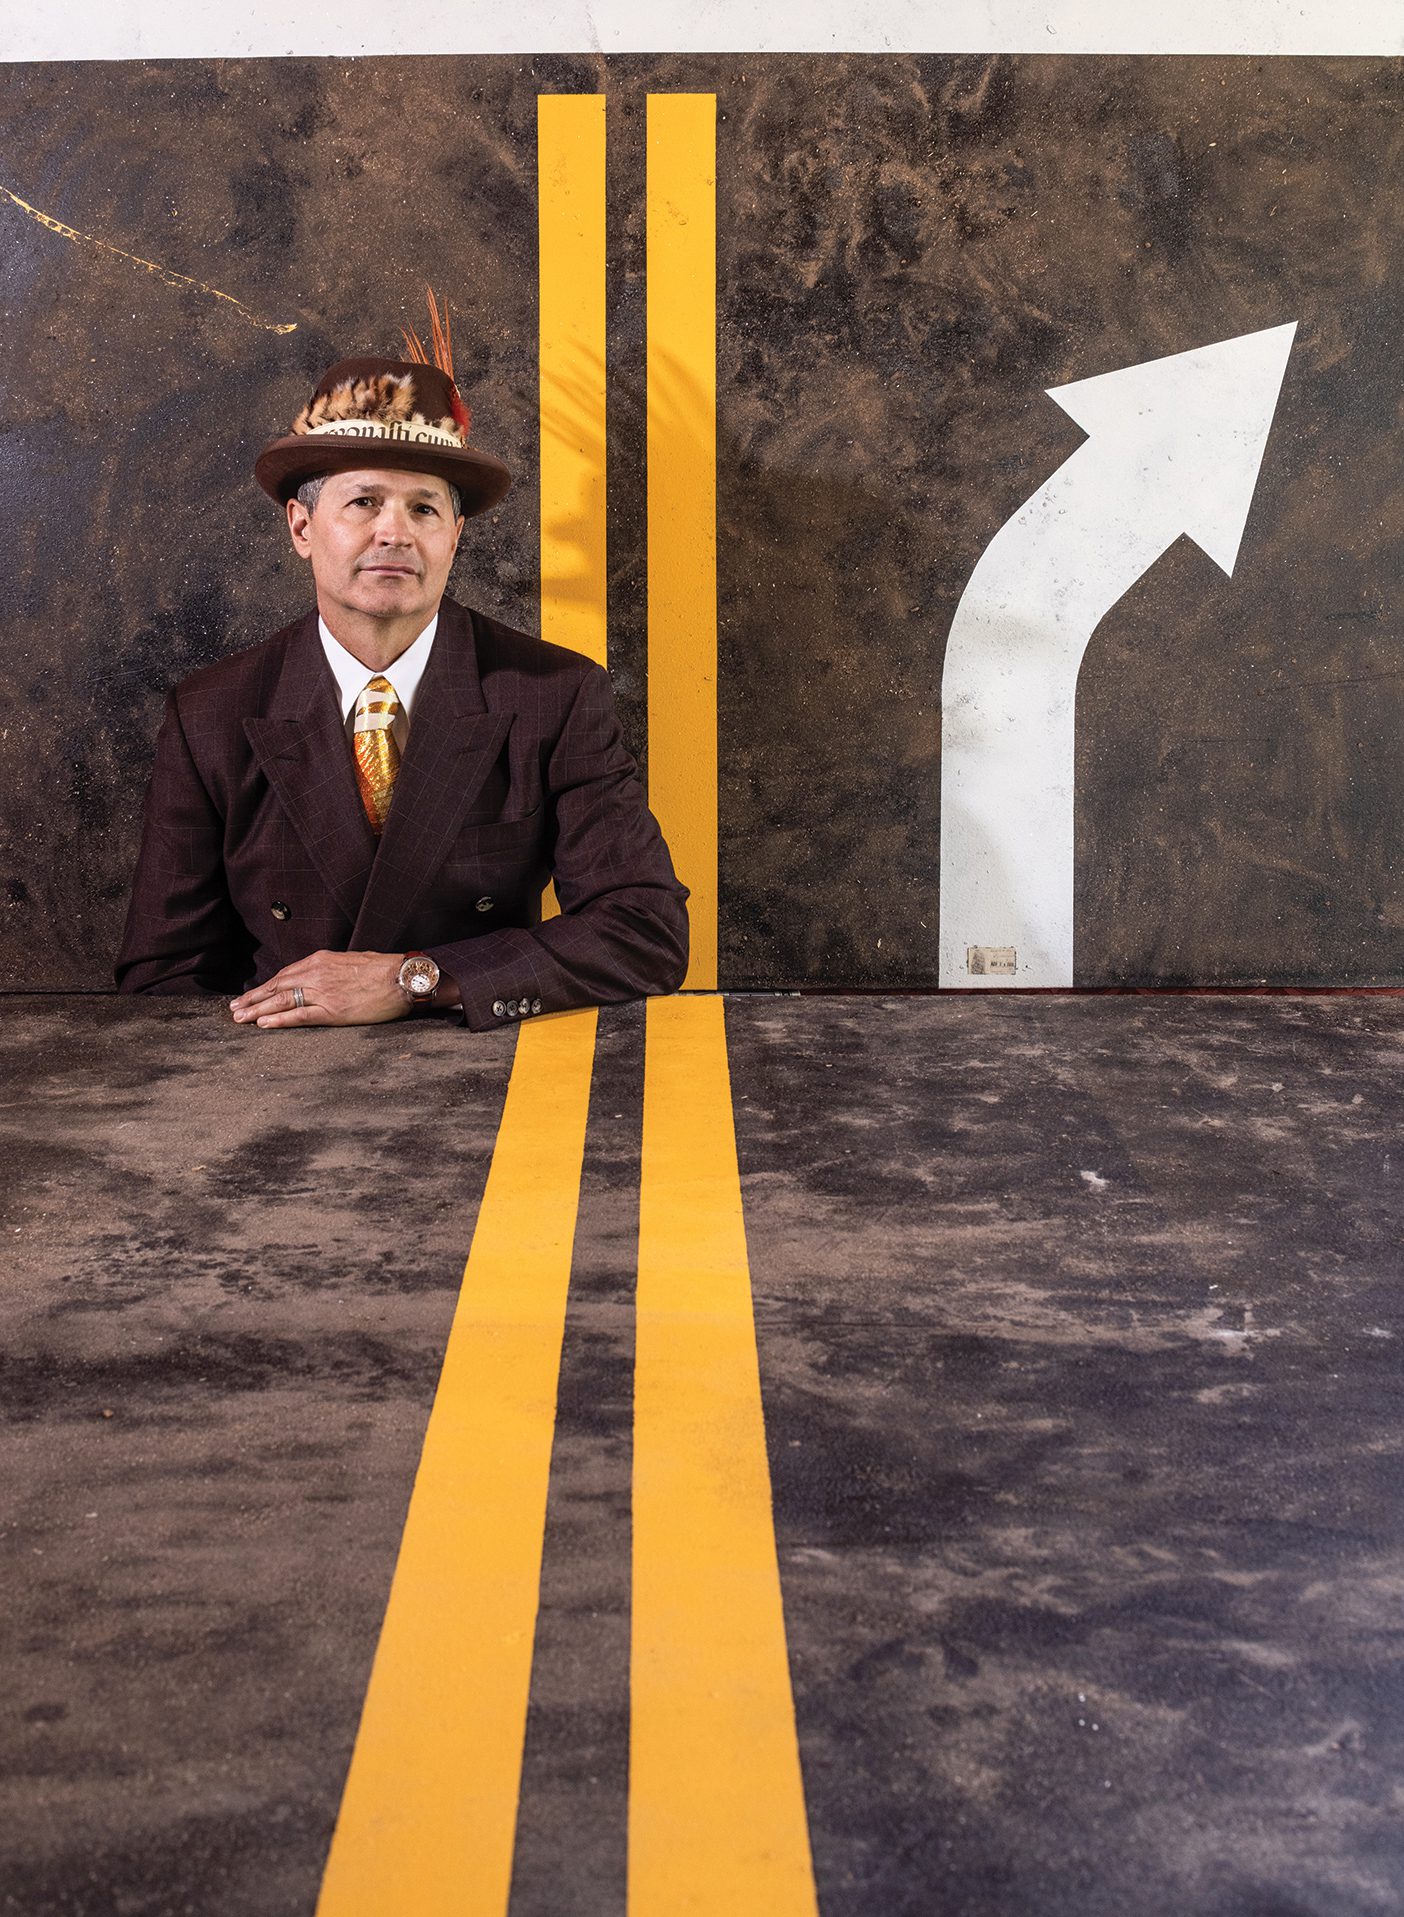 Artist Todd Stilson, wearing an orange tie and feathered top hat, stands in front of his road-inspired artwork. A table, also painted to look like a road, covers the bottom half of his body.